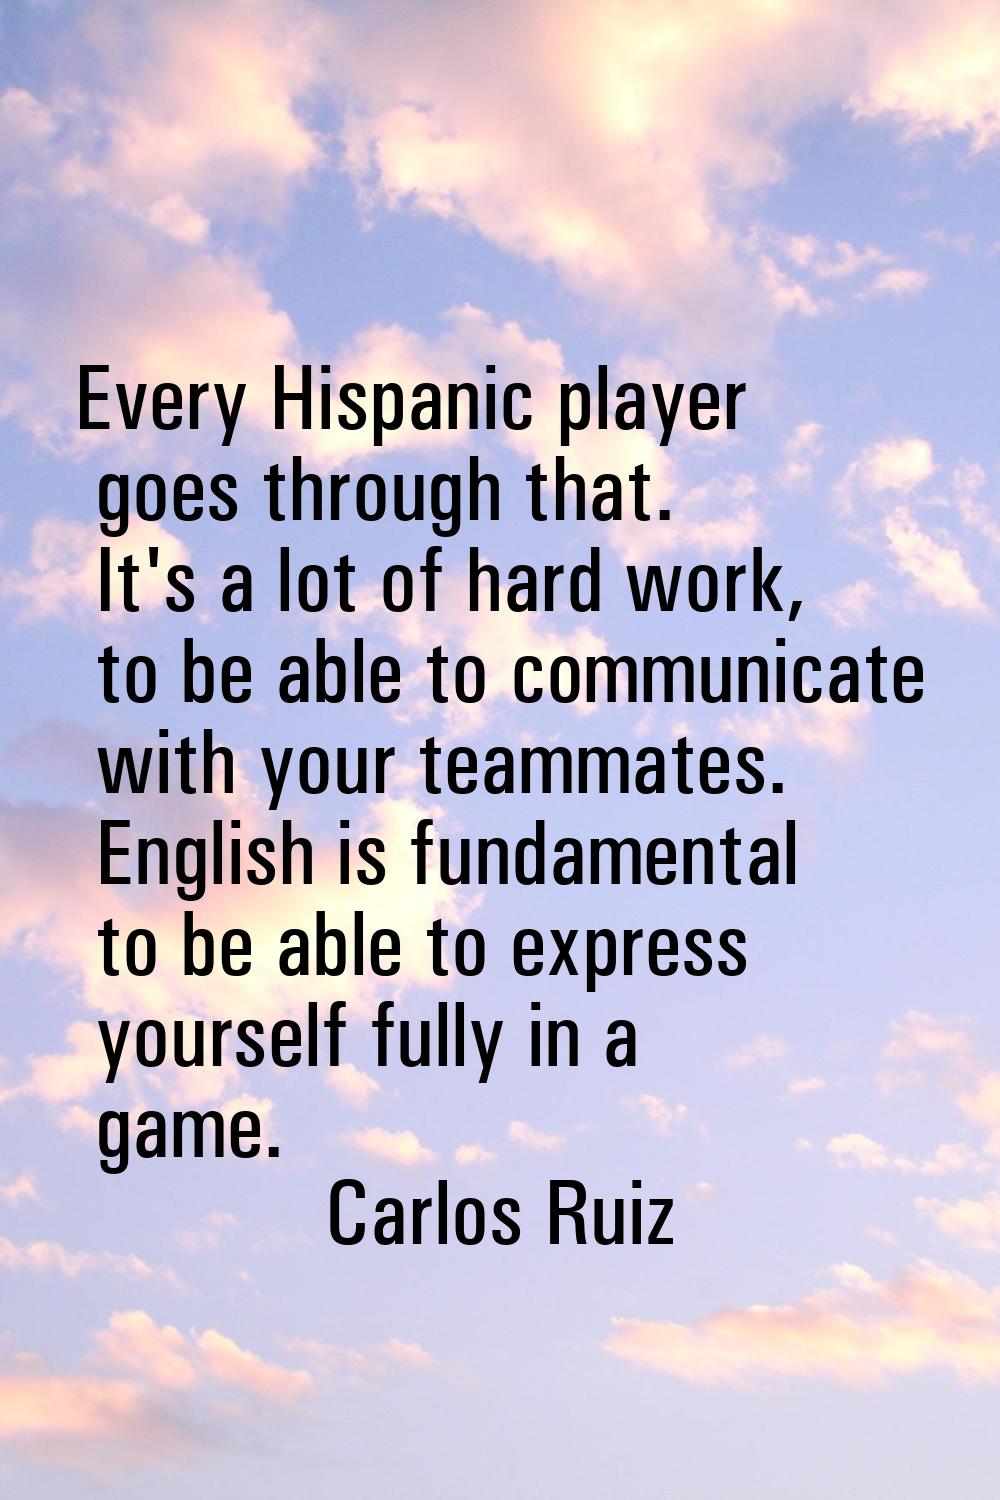 Every Hispanic player goes through that. It's a lot of hard work, to be able to communicate with yo